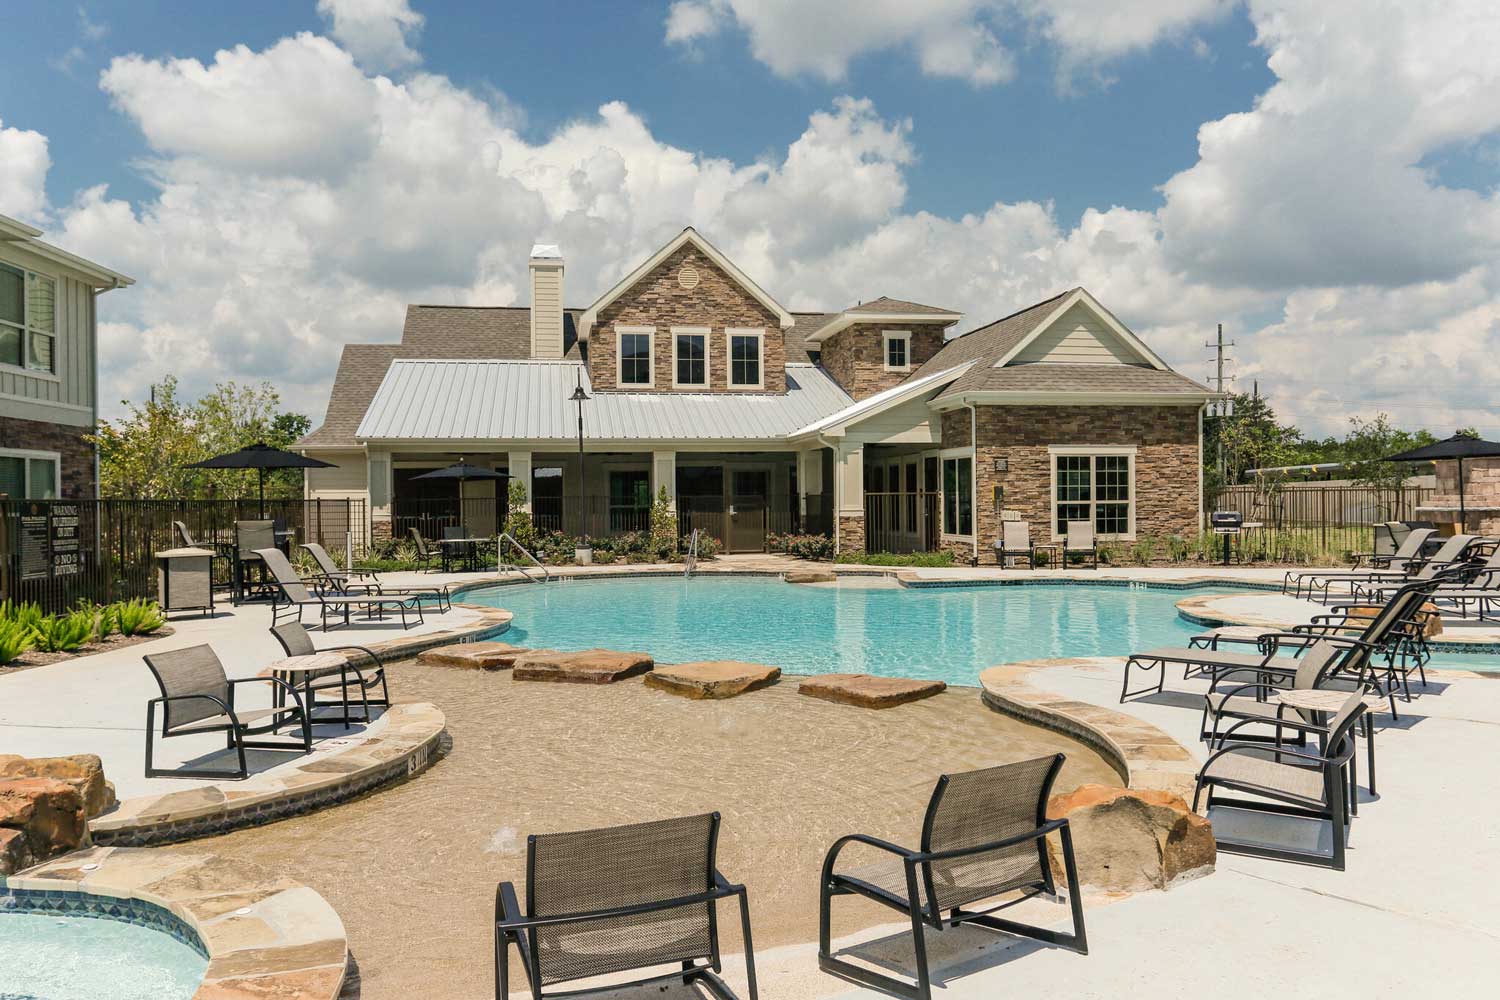 Cool Poolside Sundecks at Oxford at the Ranch Apartments in Waller, Texas